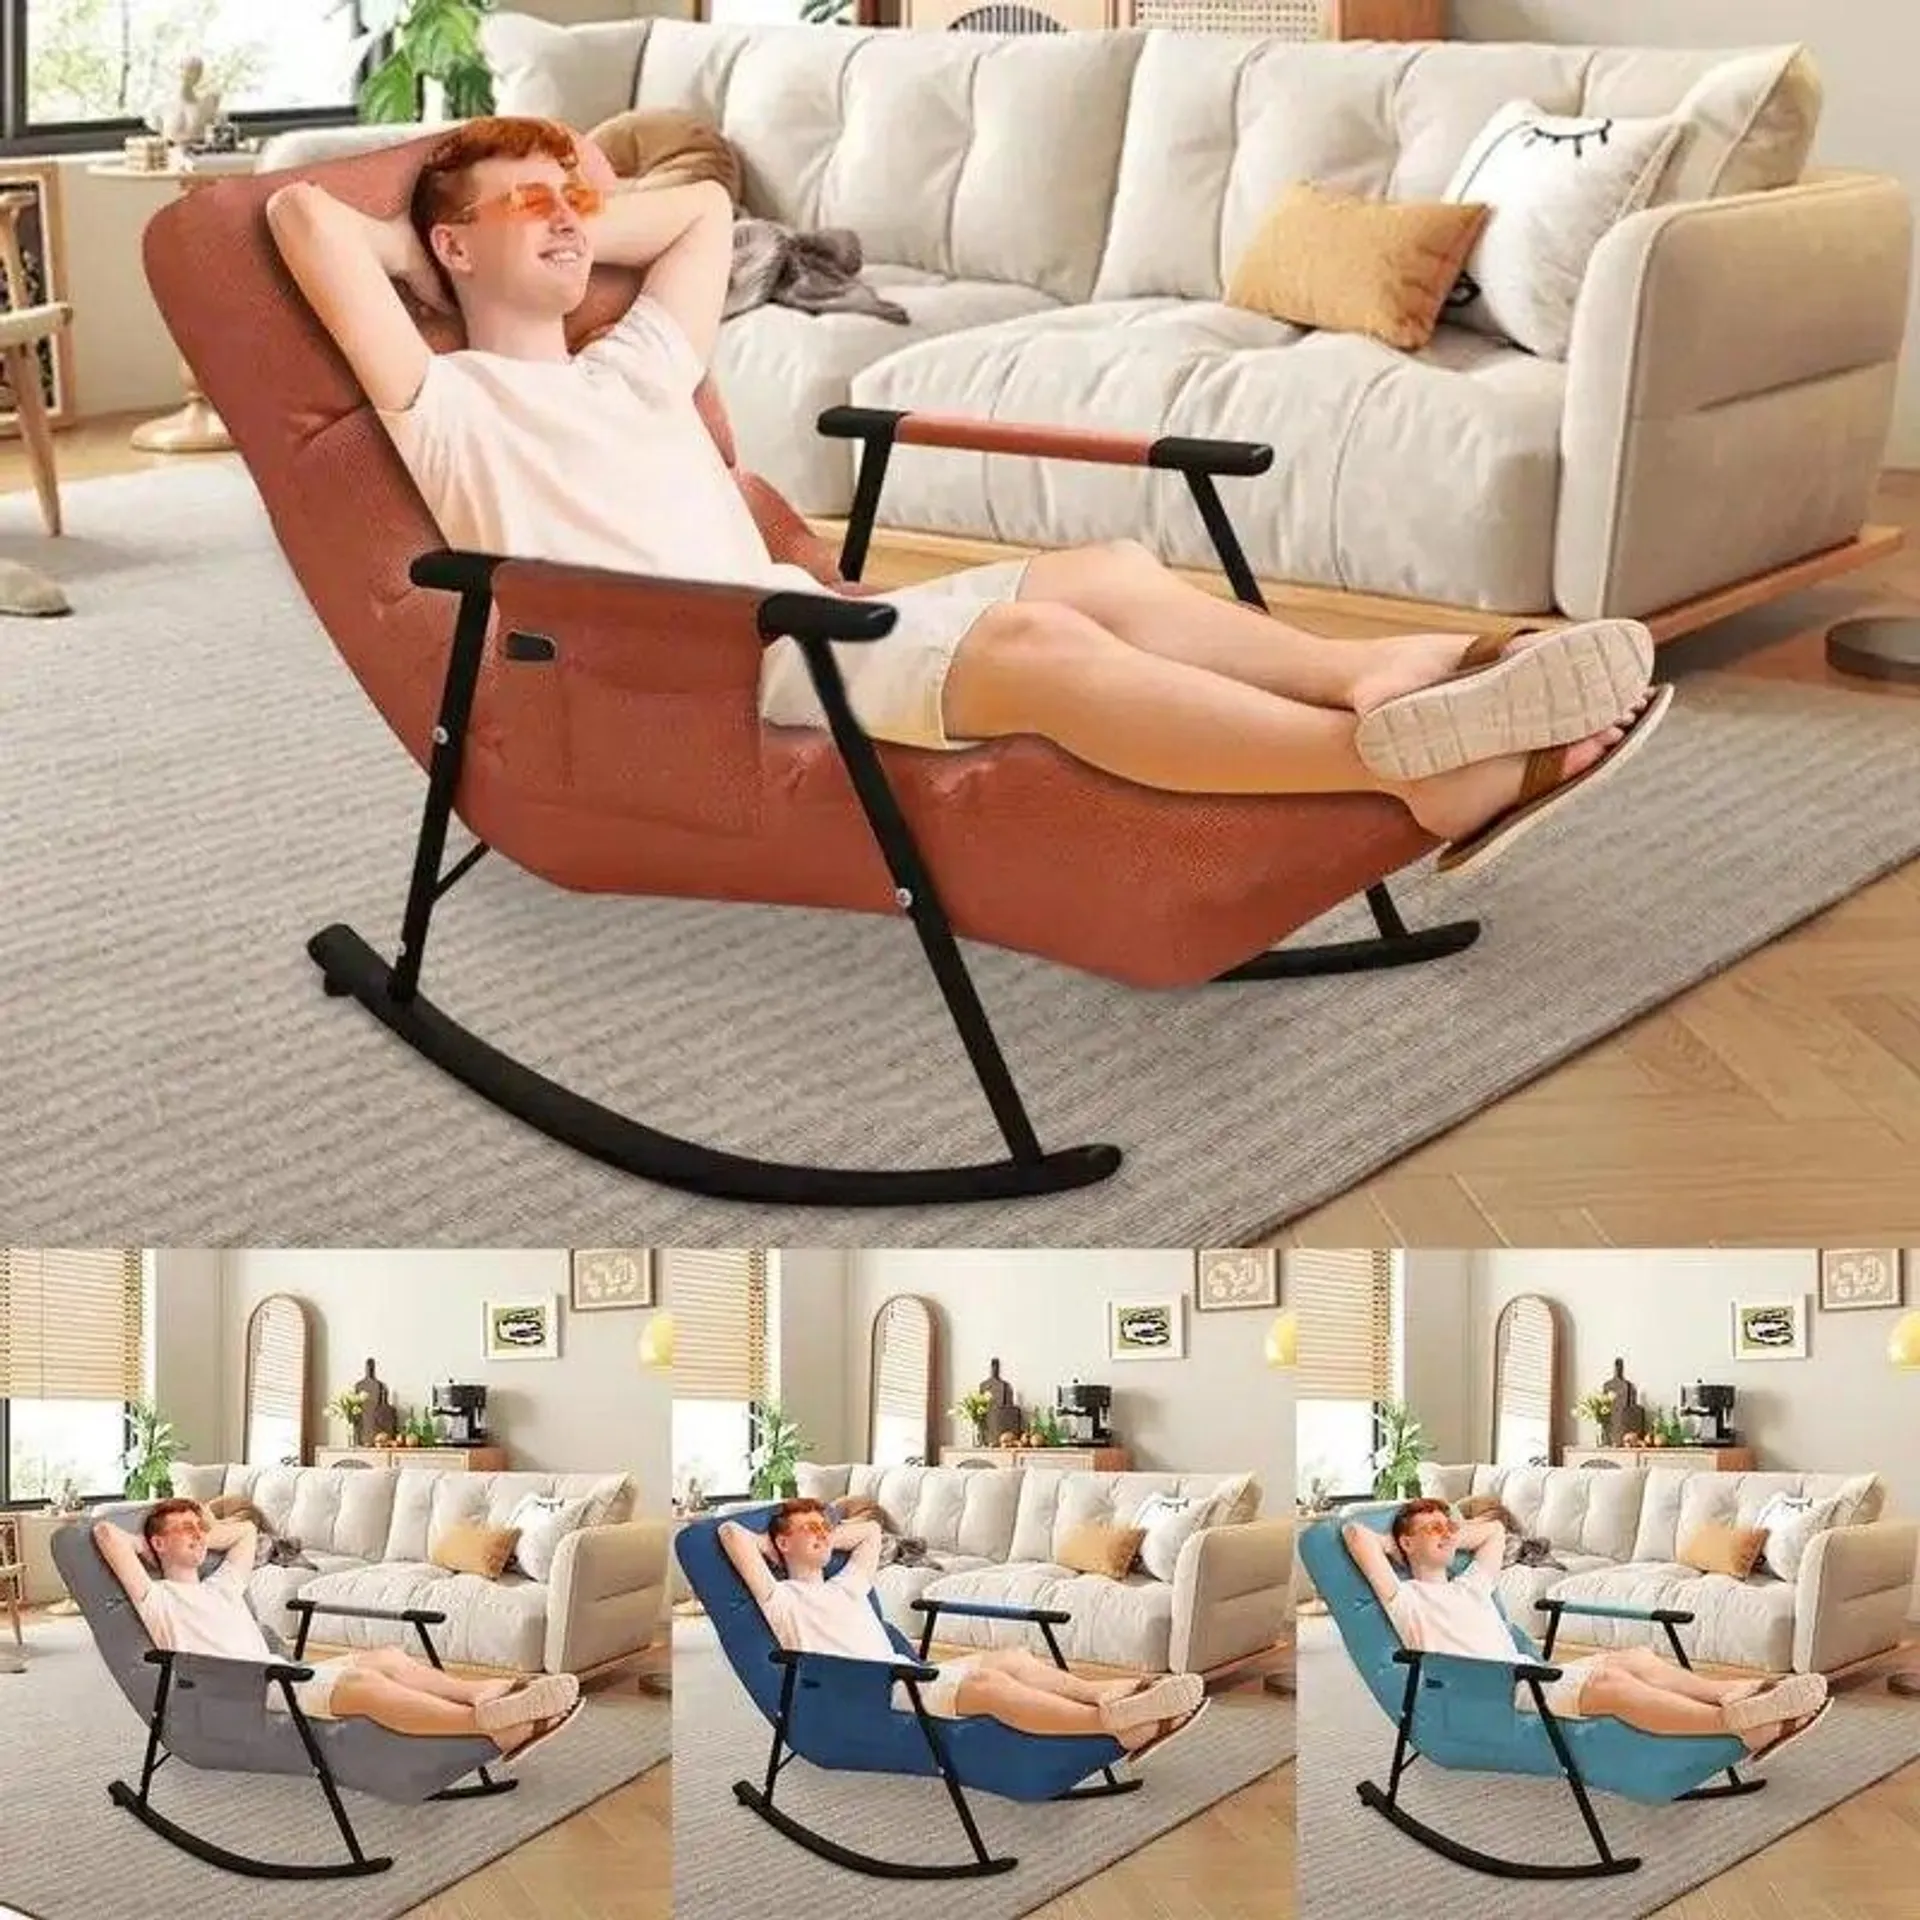 Rocking Chair For Bedroom Simple Modernn Foldable Living Room Folding Rocking Chair Balcony Relaxing Lounge Leisure Chairs